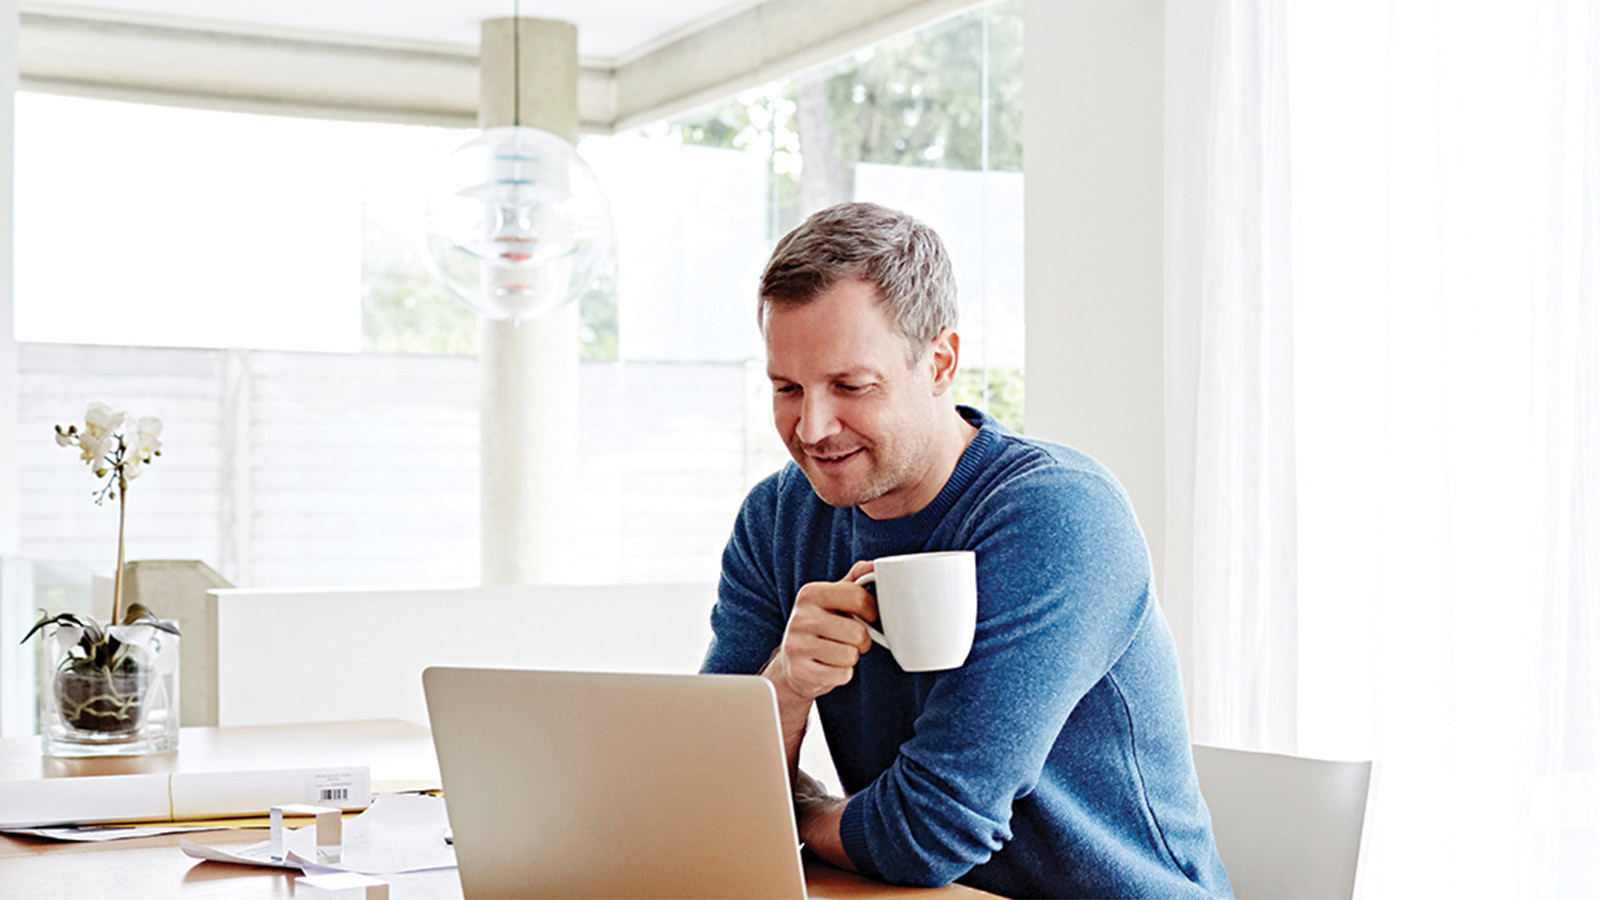 Man looking at his laptop and holding a white mug, in front of sheer curtains